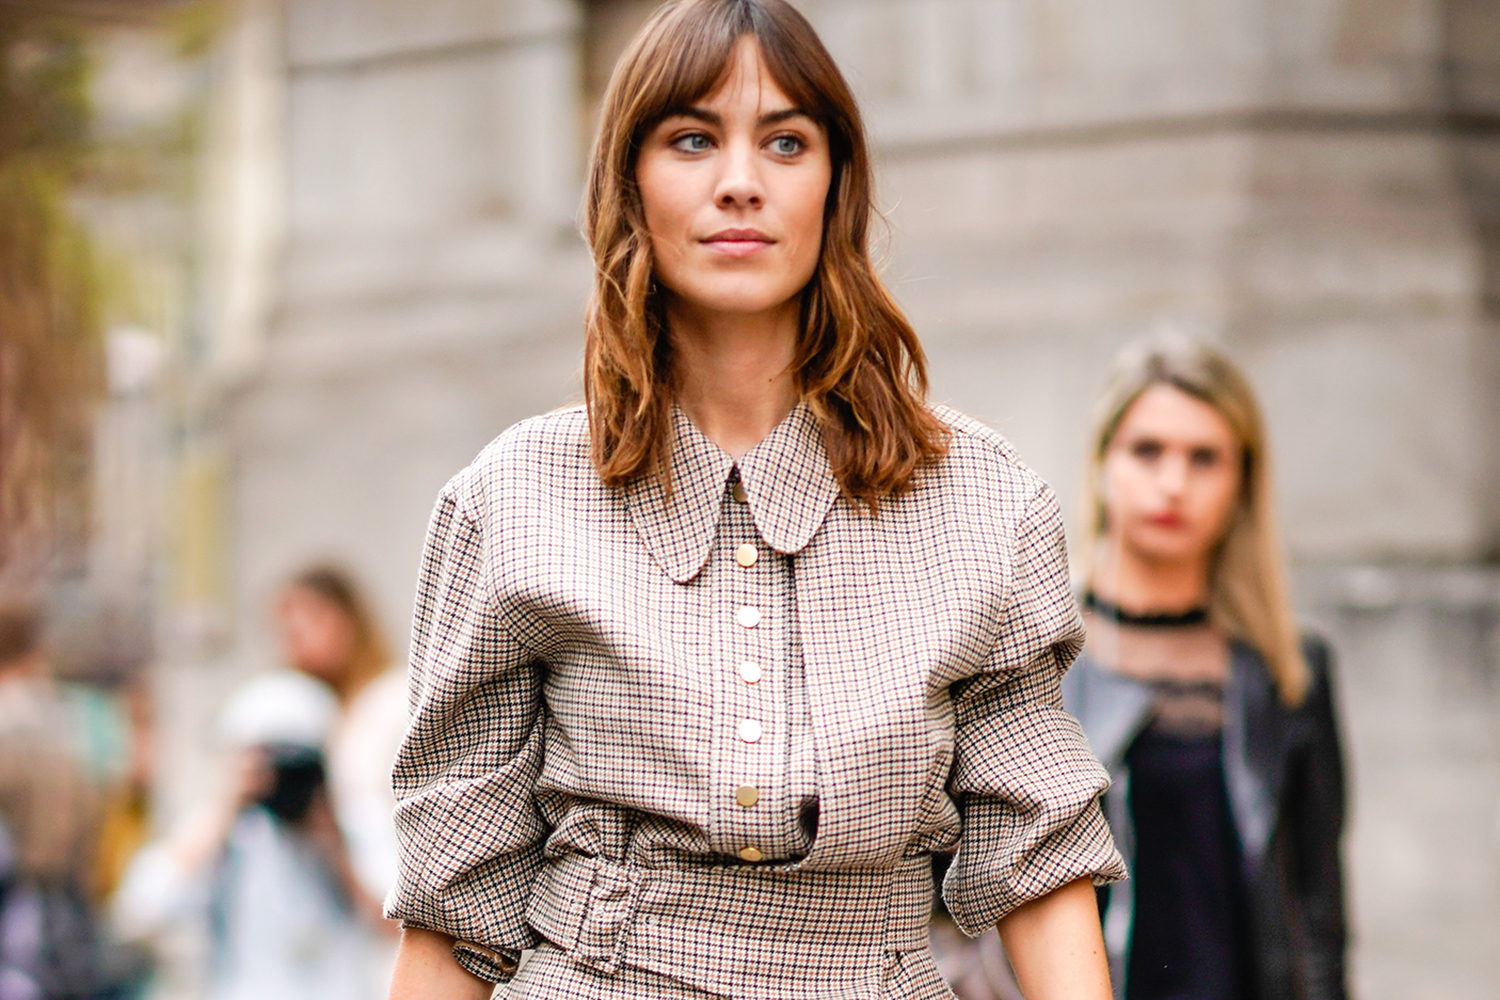 FYI, Mini Skirts Are Making A Comeback – Yes, Seriously